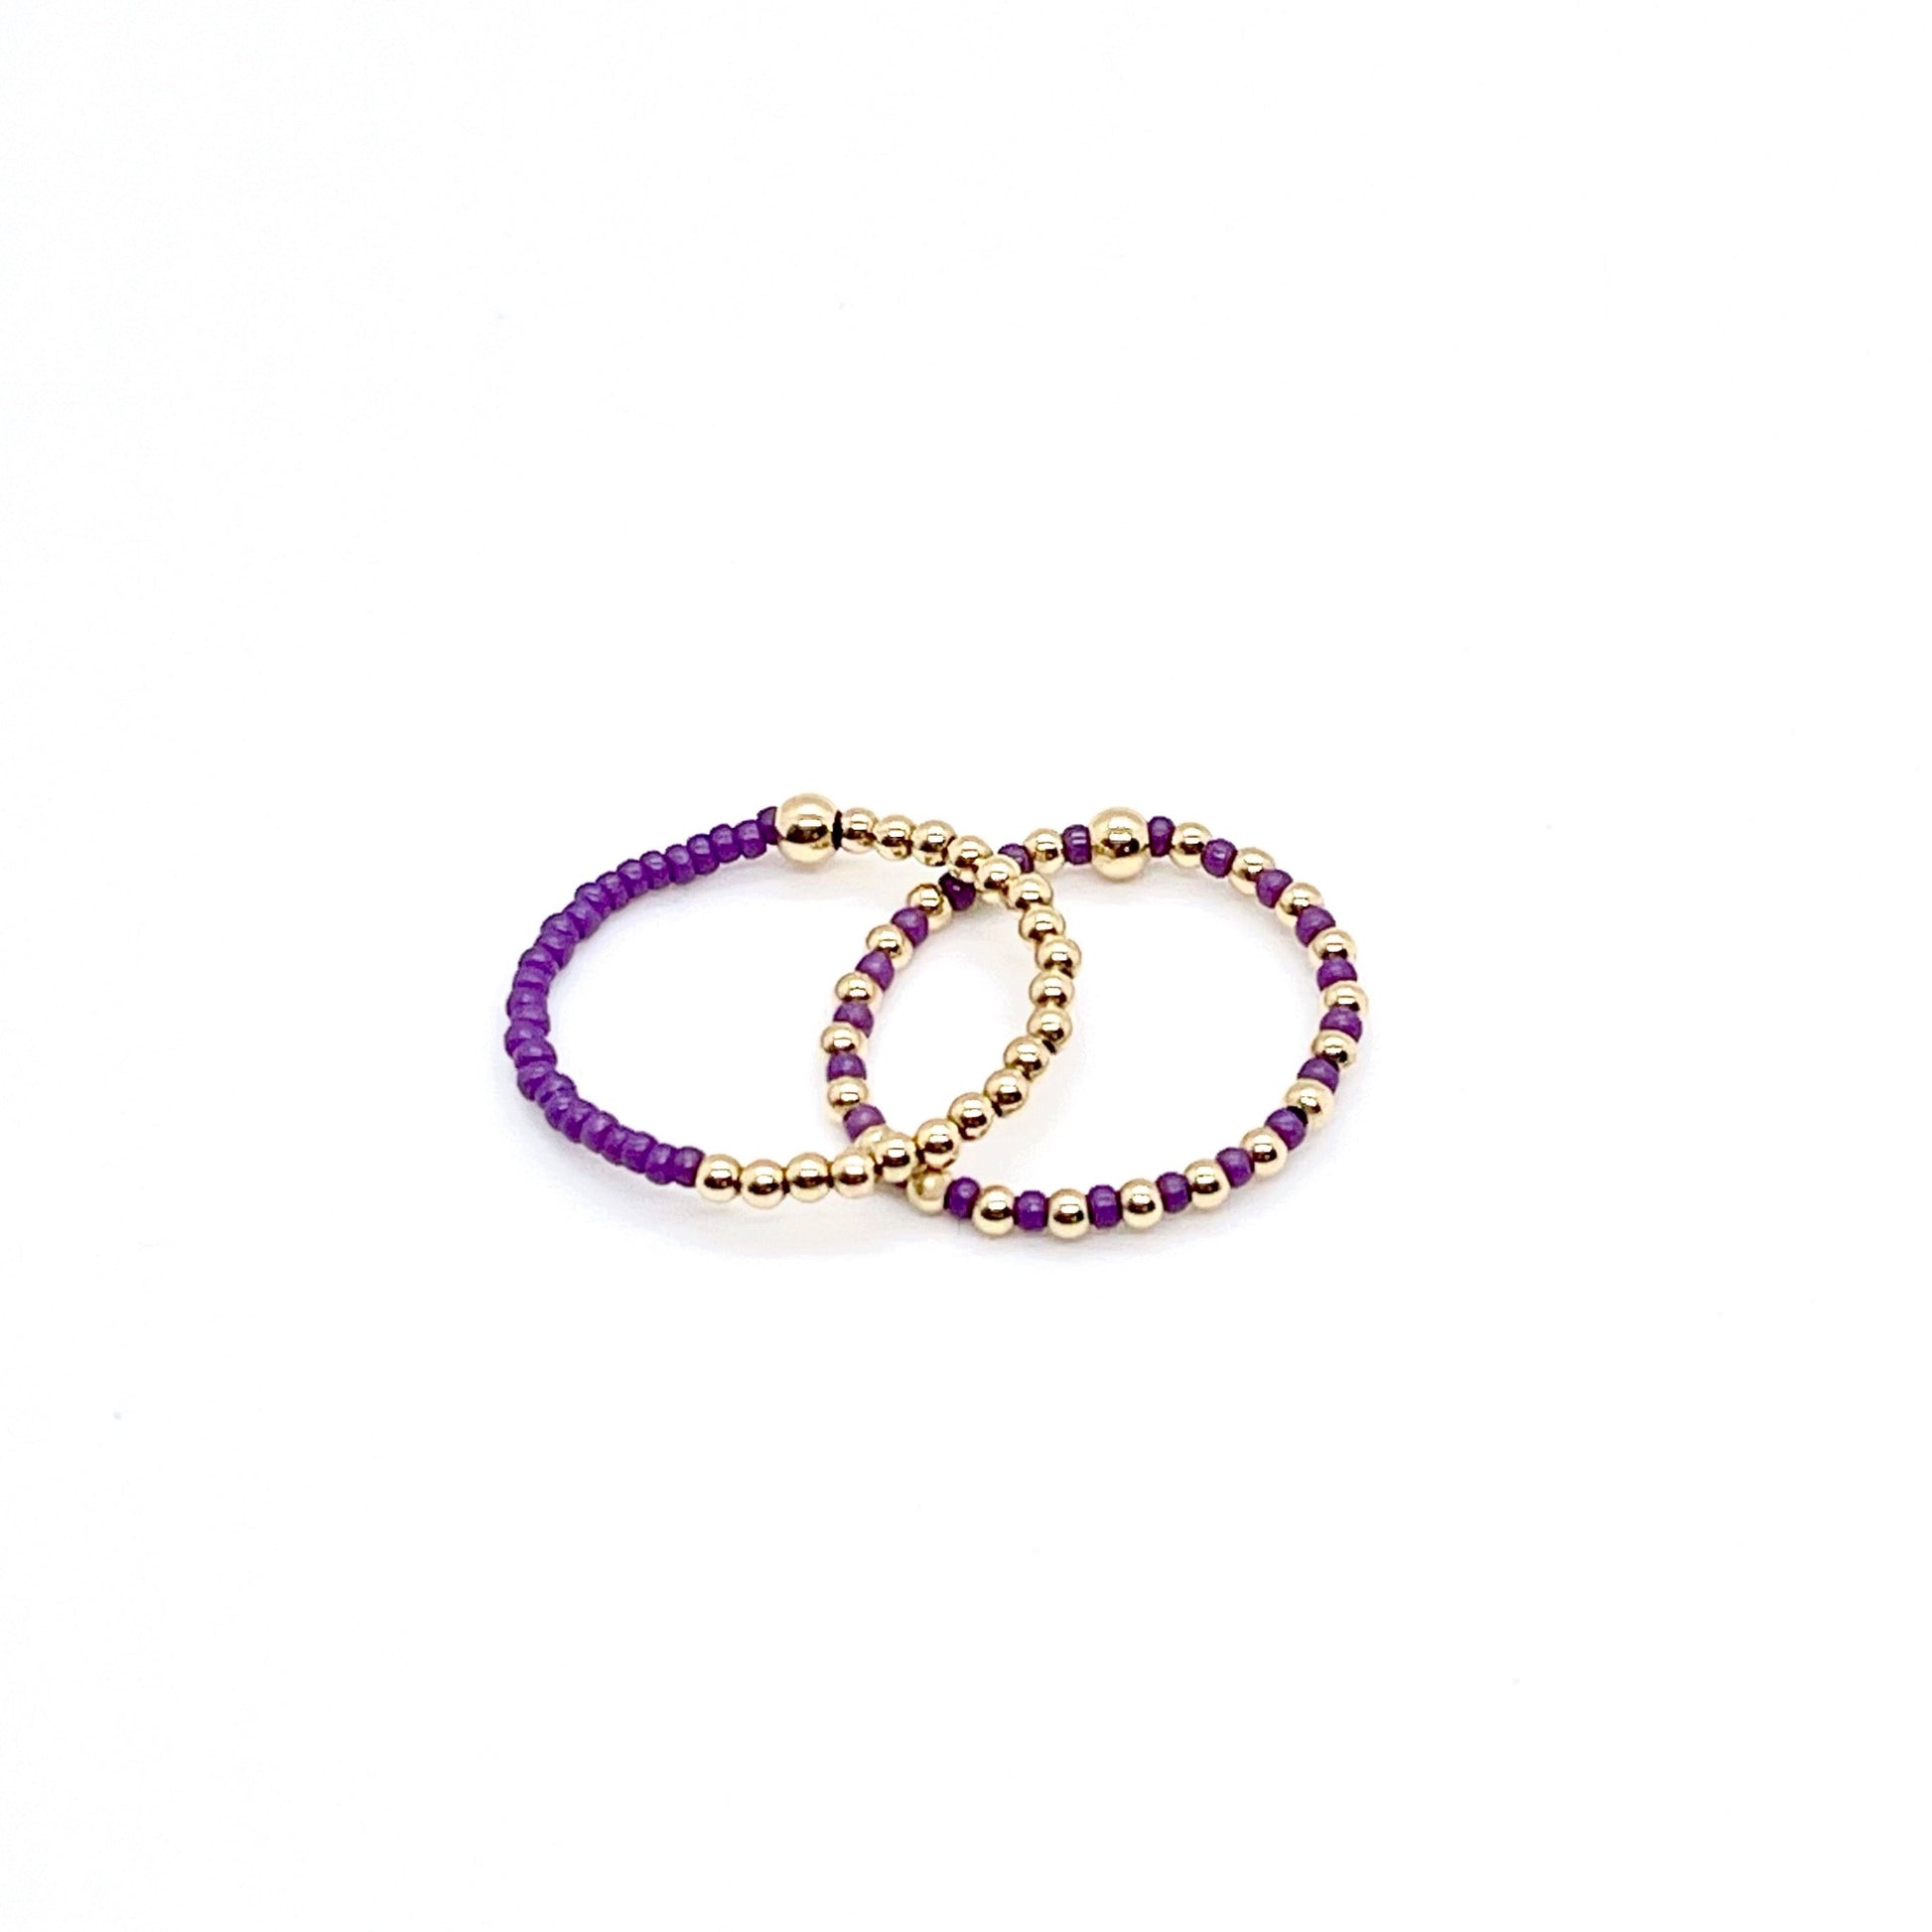 Stretch ring set with purple color block and seed beads alternating with 2mm gold balls on stretch cord.